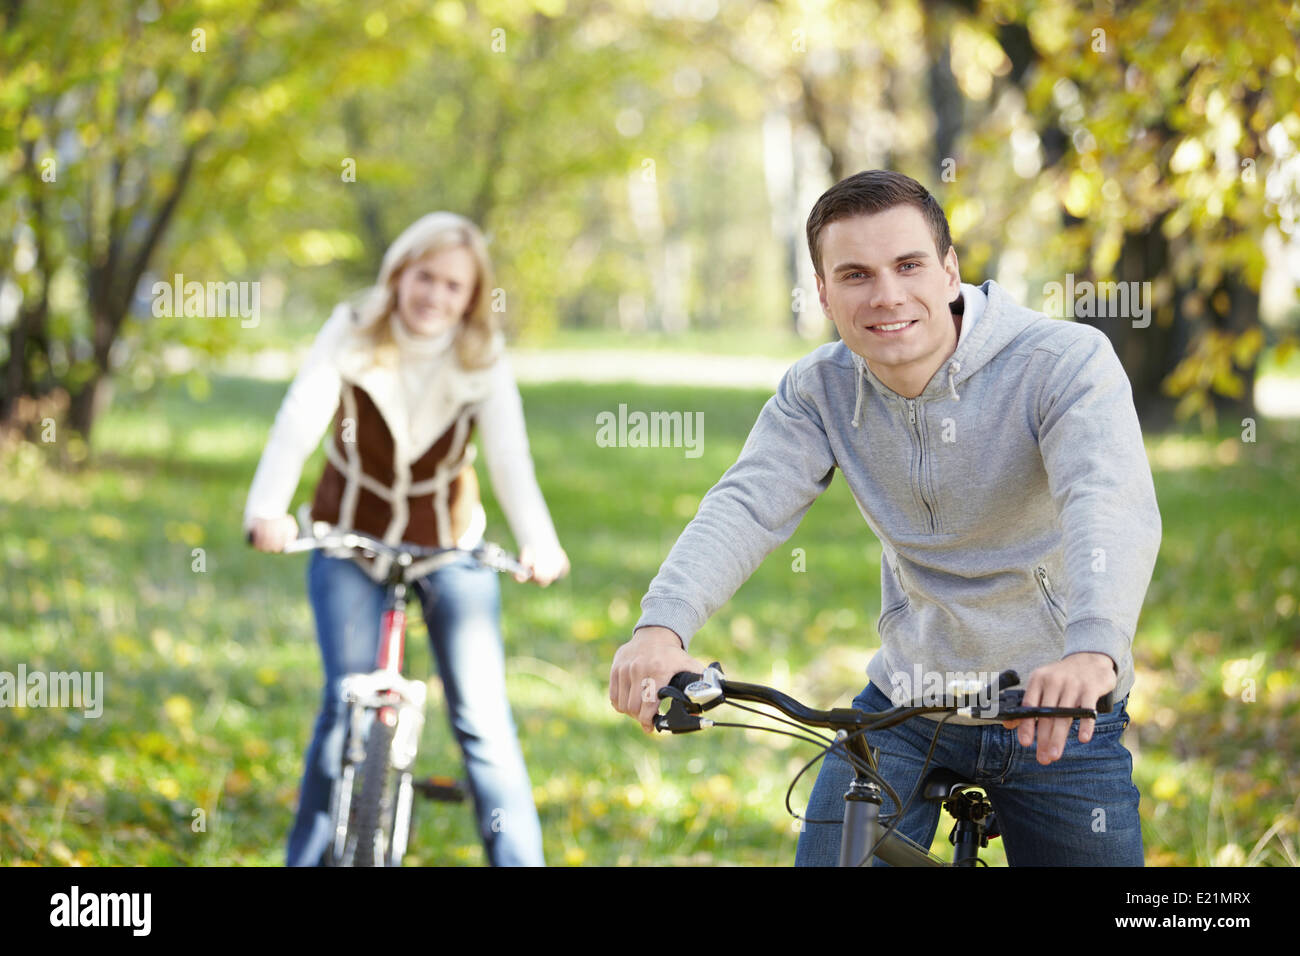 A young man on a bicycle in the foreground Stock Photo